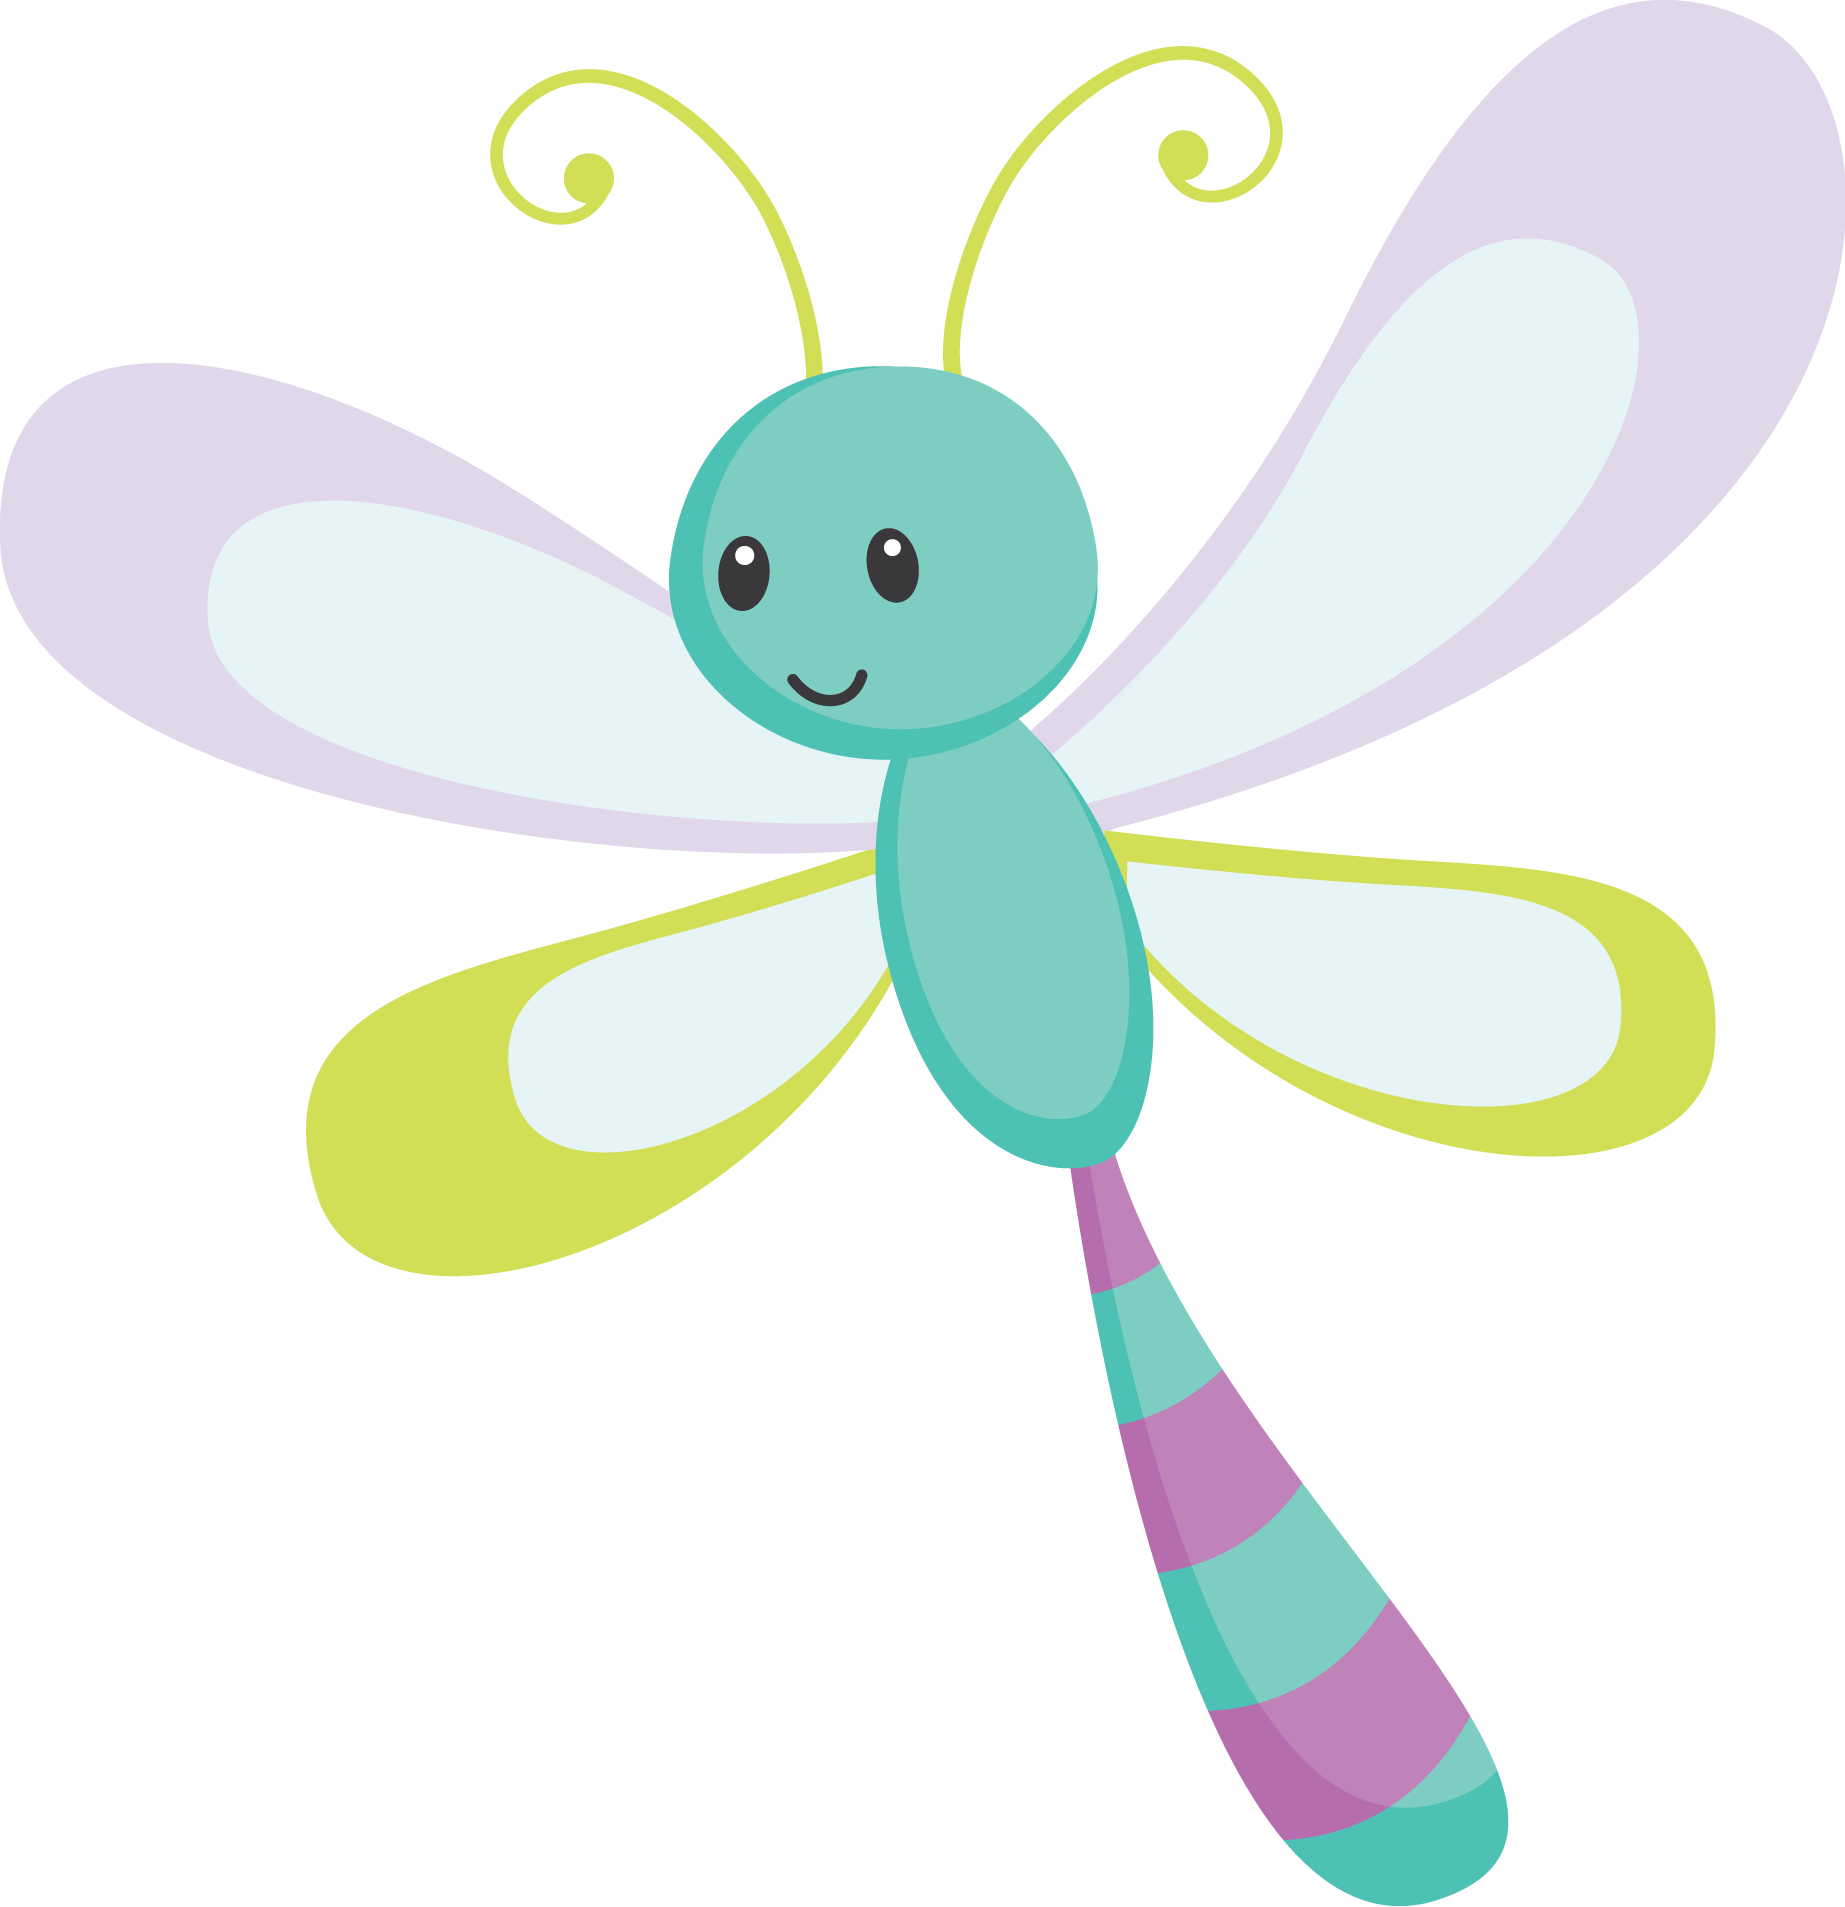  ugs bichos pinterest. Dragonfly clipart whimsical